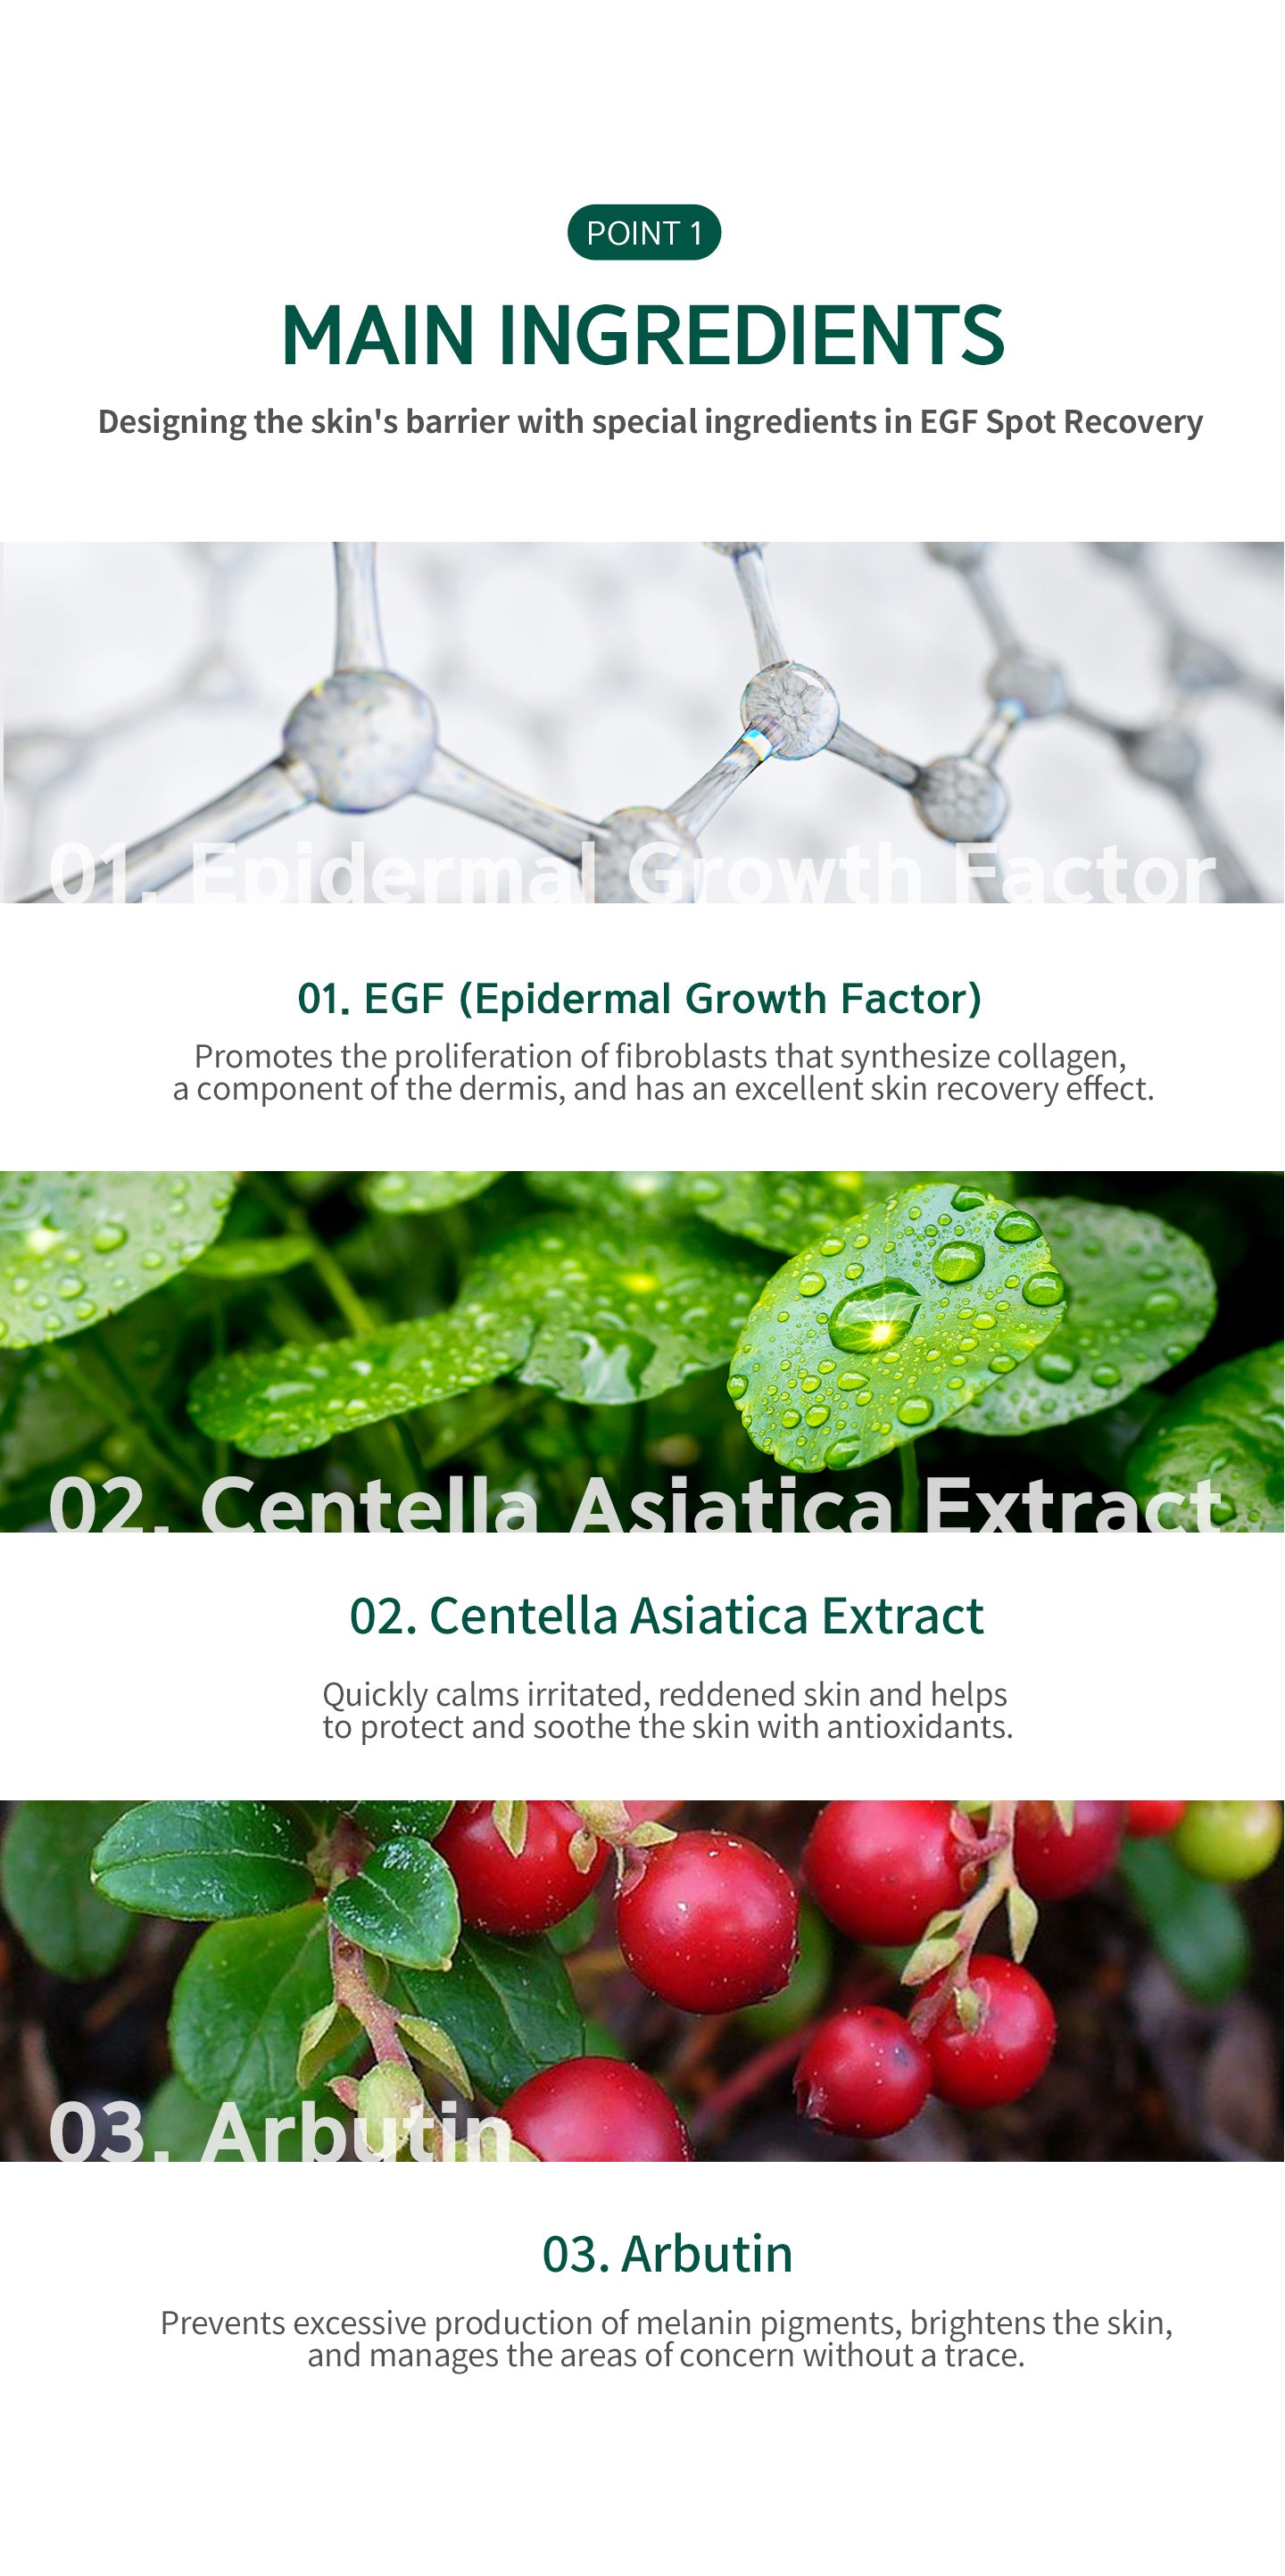 main ingredients: egf (epidermal growth factor) promotes the prolifeation of fibroblasts that synthesize collagen. Centella asiatica extract, quickly calm irritated, reddened skin. Arbutin, prevents excessive production of melanin pigments, brightens the 